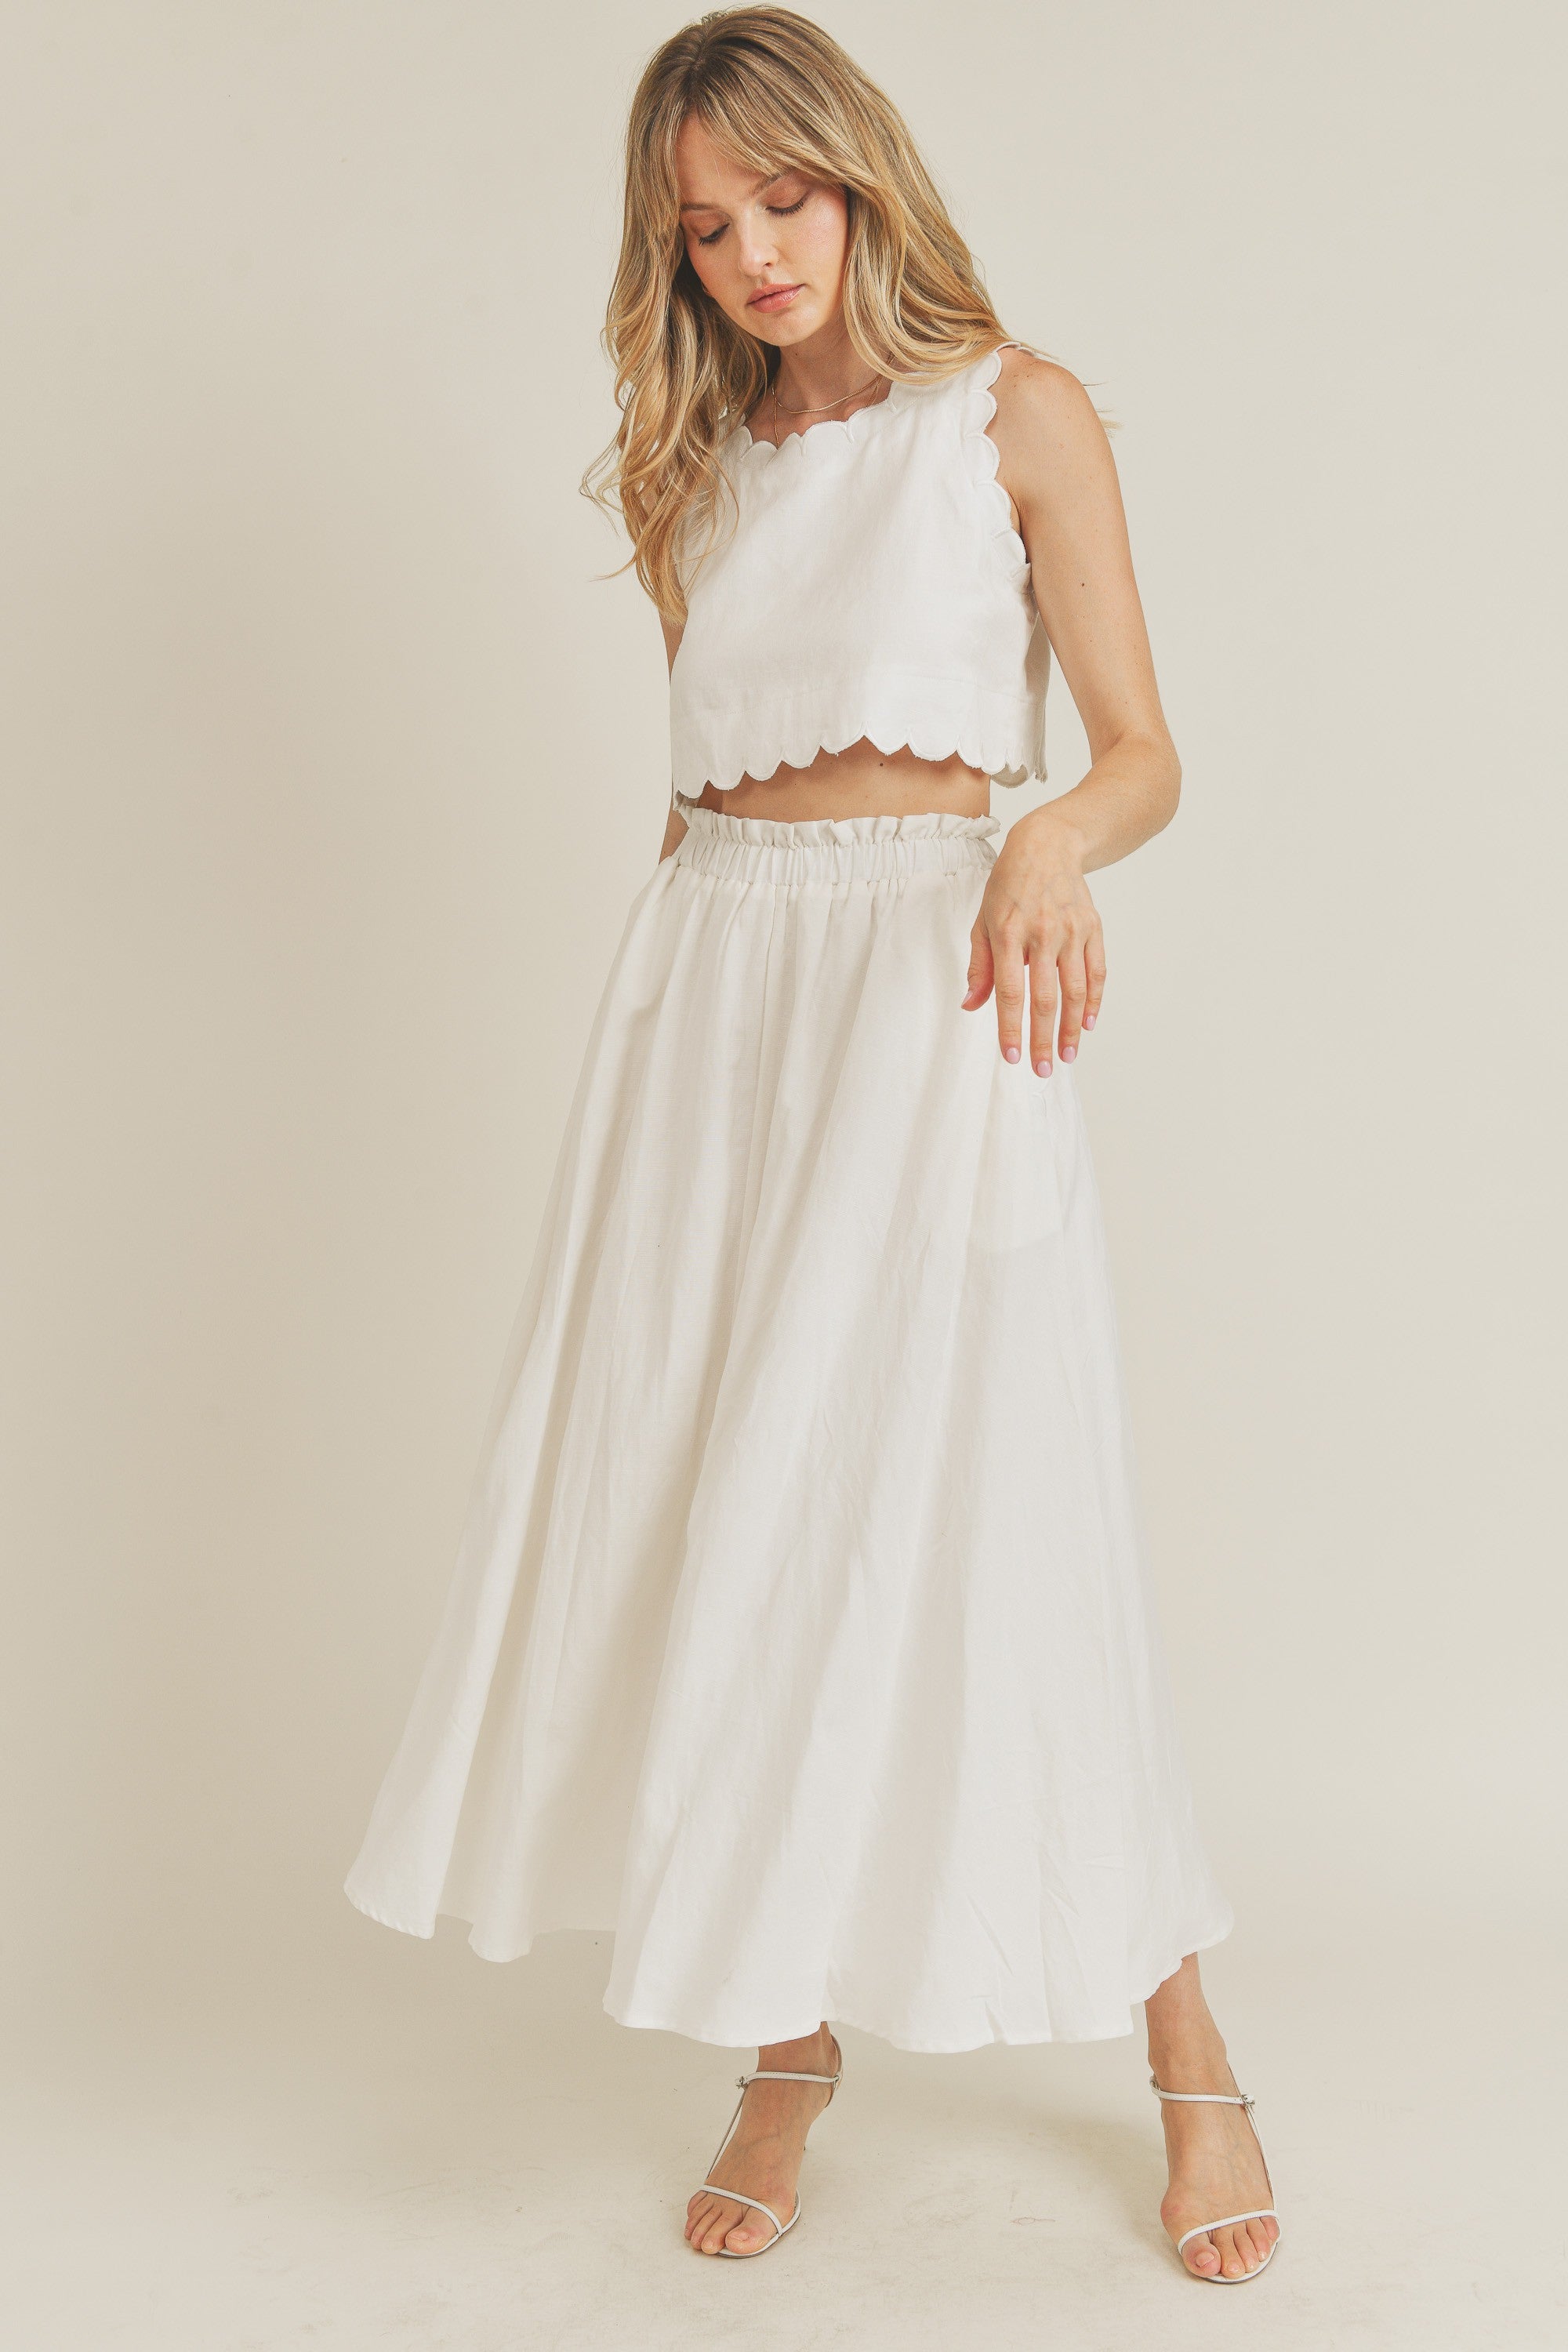 The Jesabel Scallop Top + Midi Skirt Set - Sold Seperately